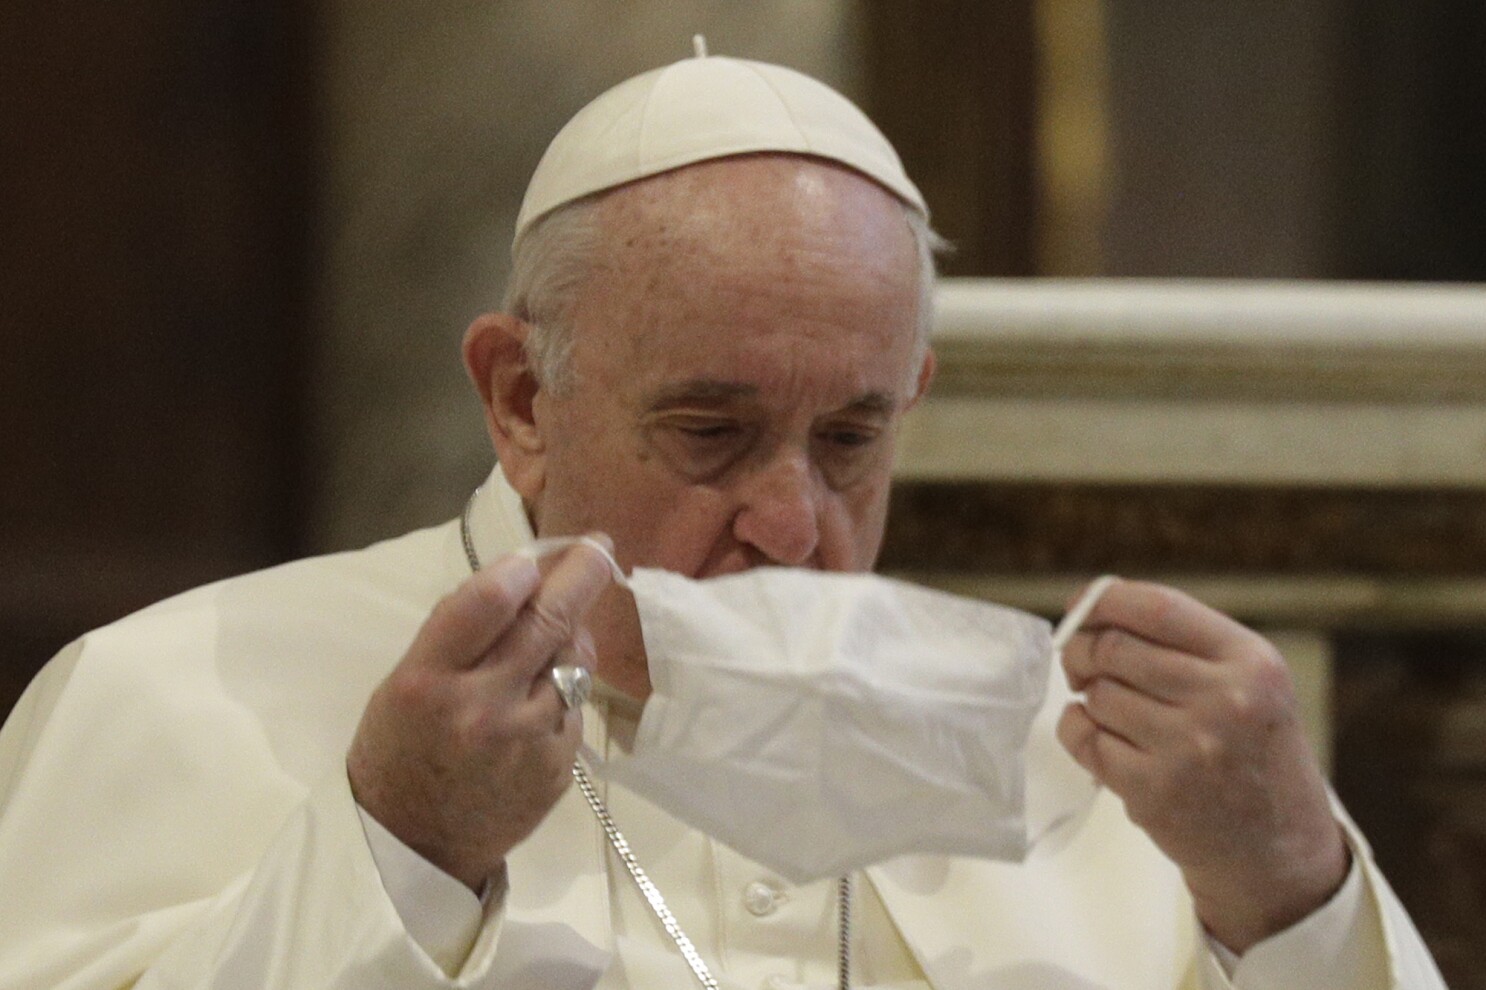 Read these Astounding Words from Pope Francis